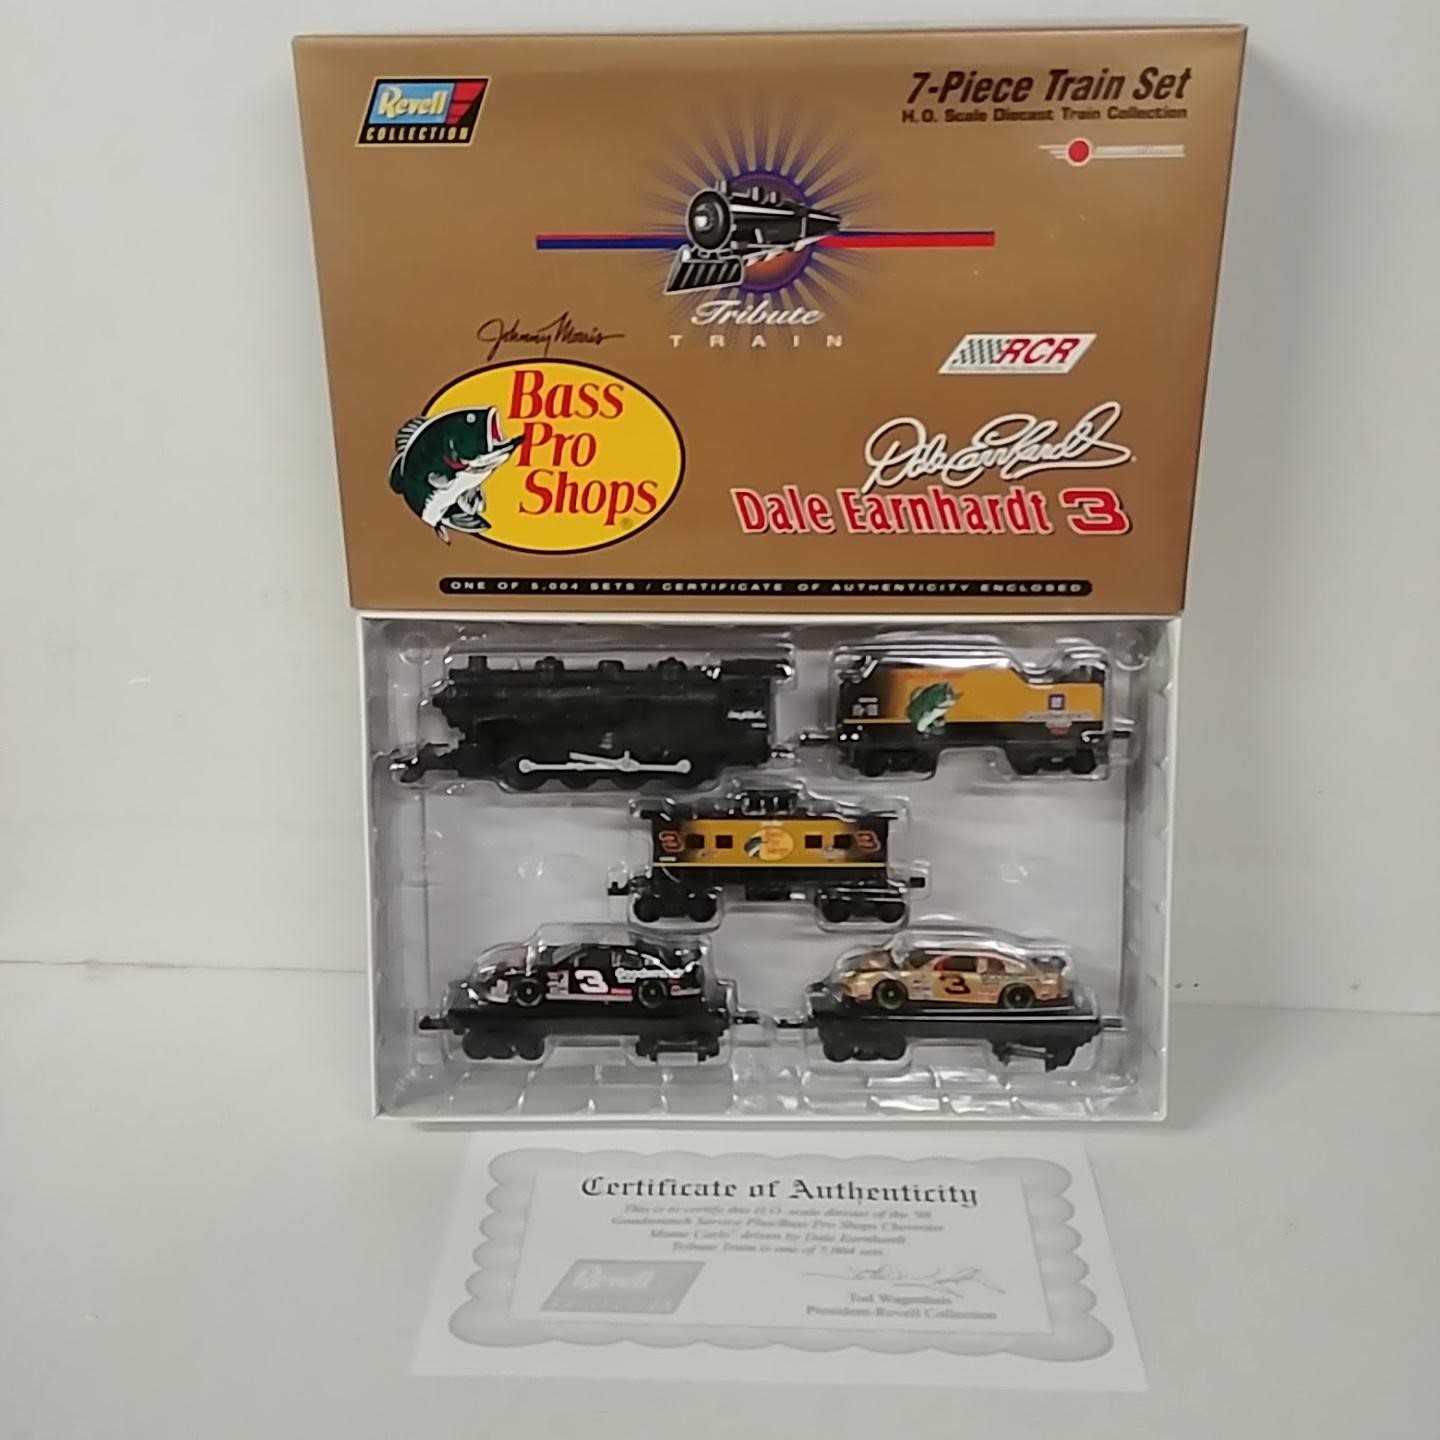 1998 Dale Earnhardt 1/64th Goodwrench "Bass Pro Shops" Revell train set